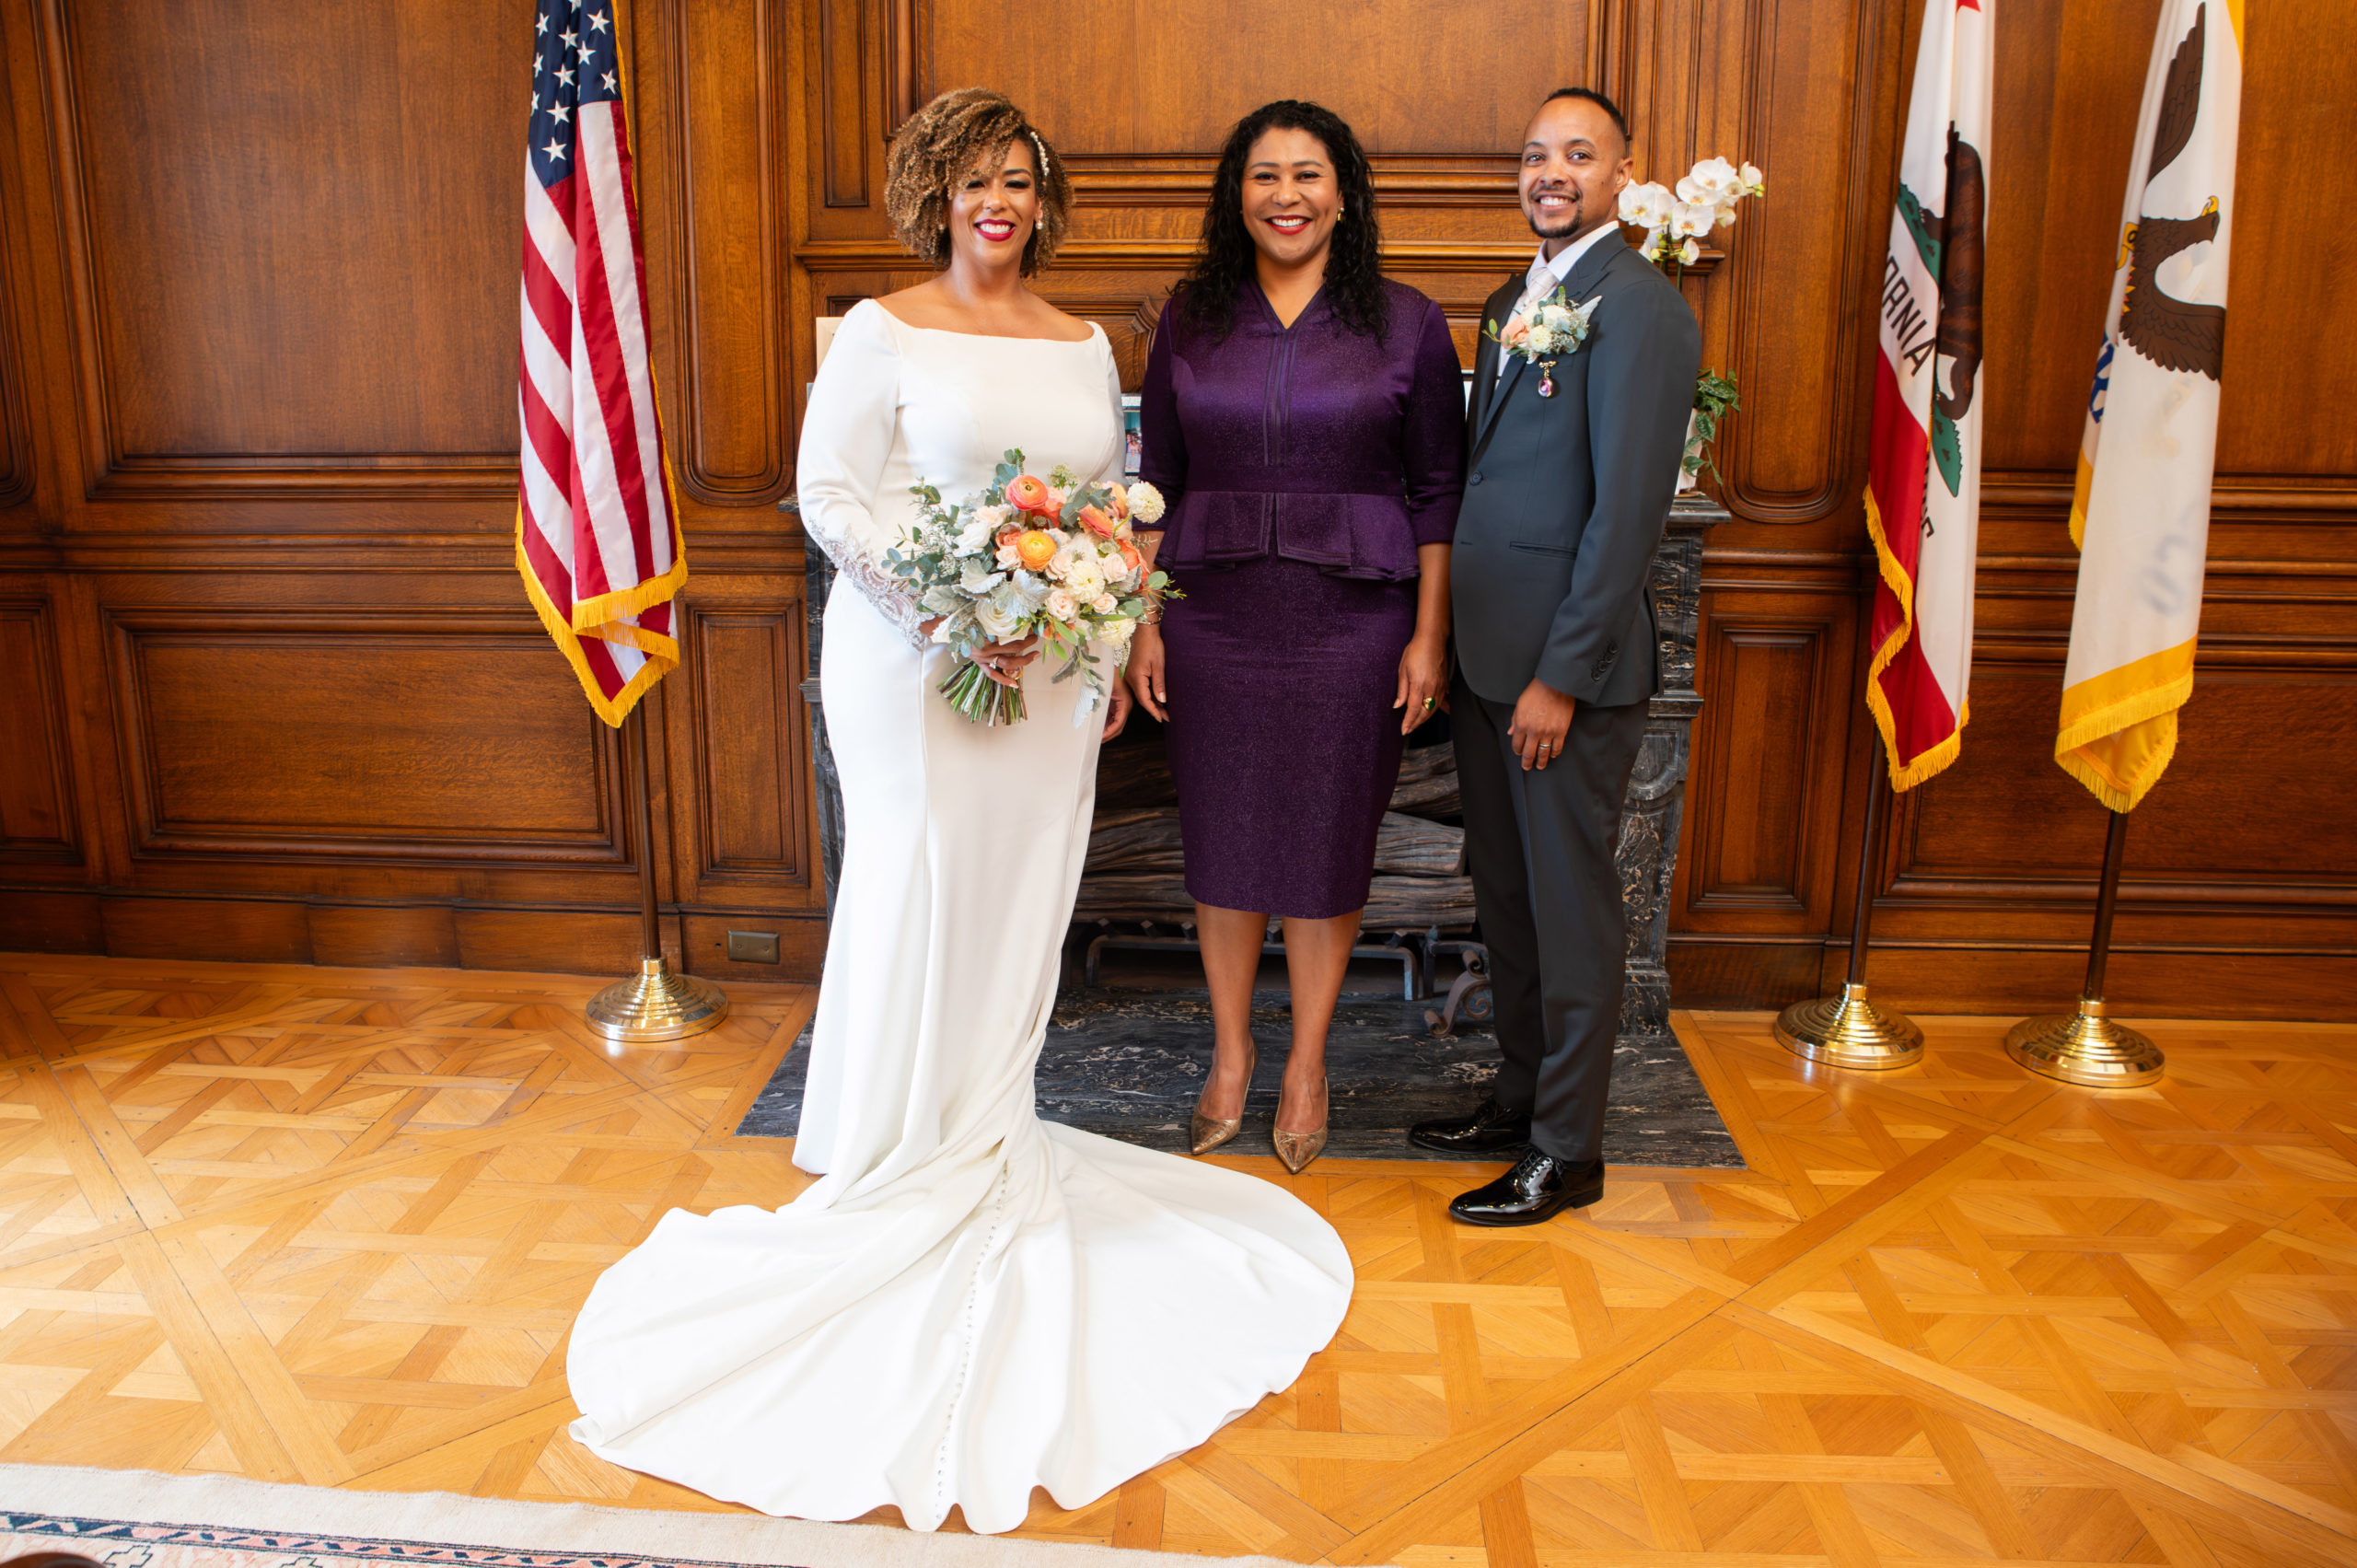 San Francisco Mayor, London Breed posing with the bride and groom in her office